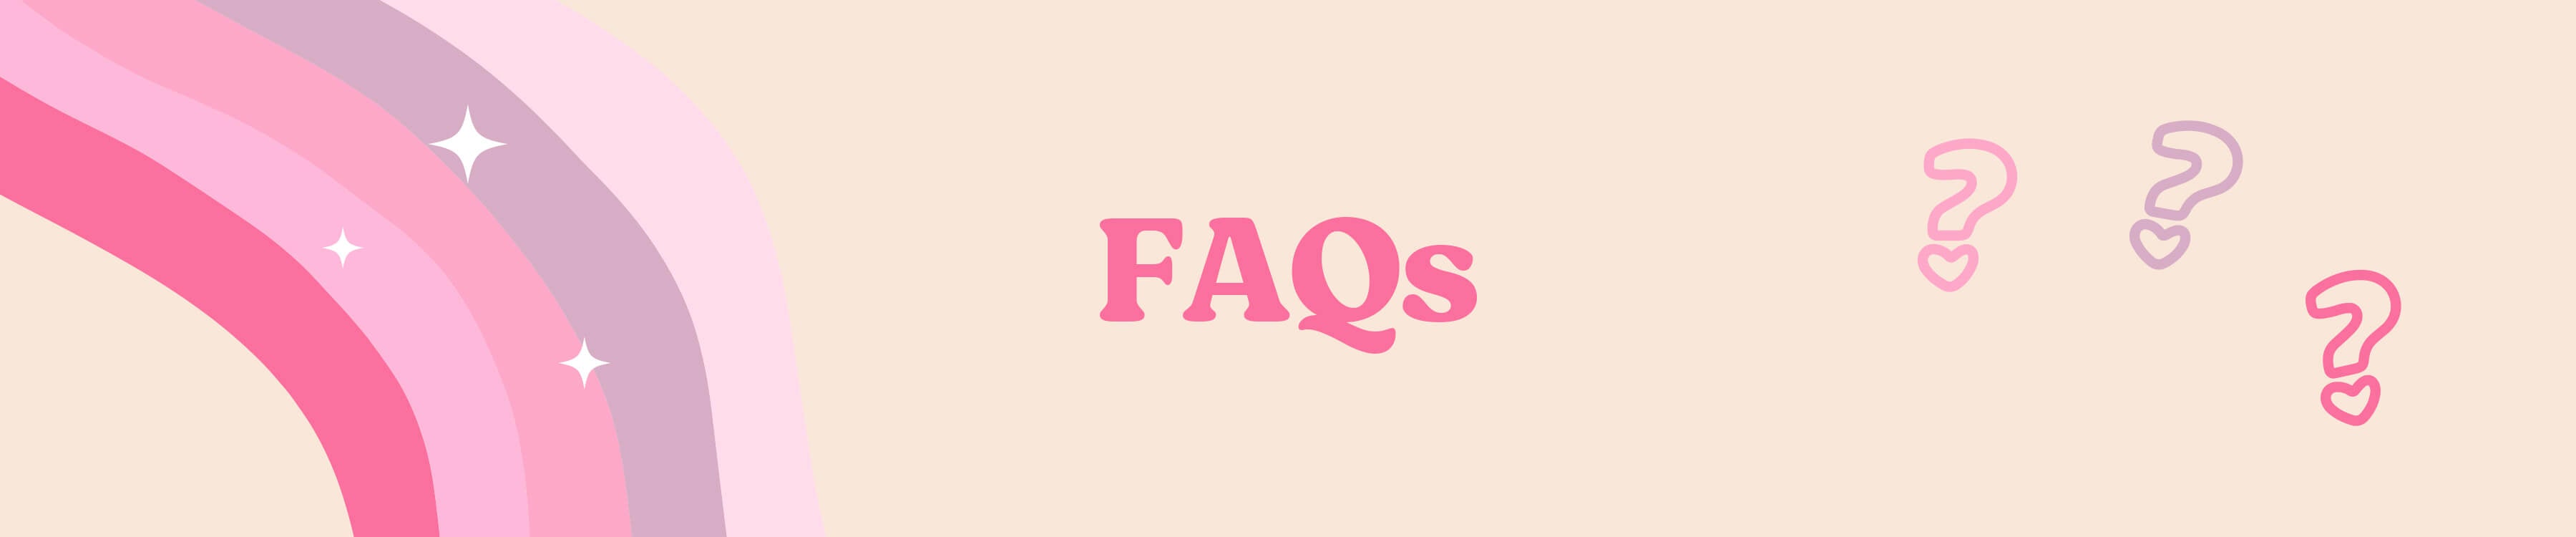 Website banner with FAQs text and question mark icons